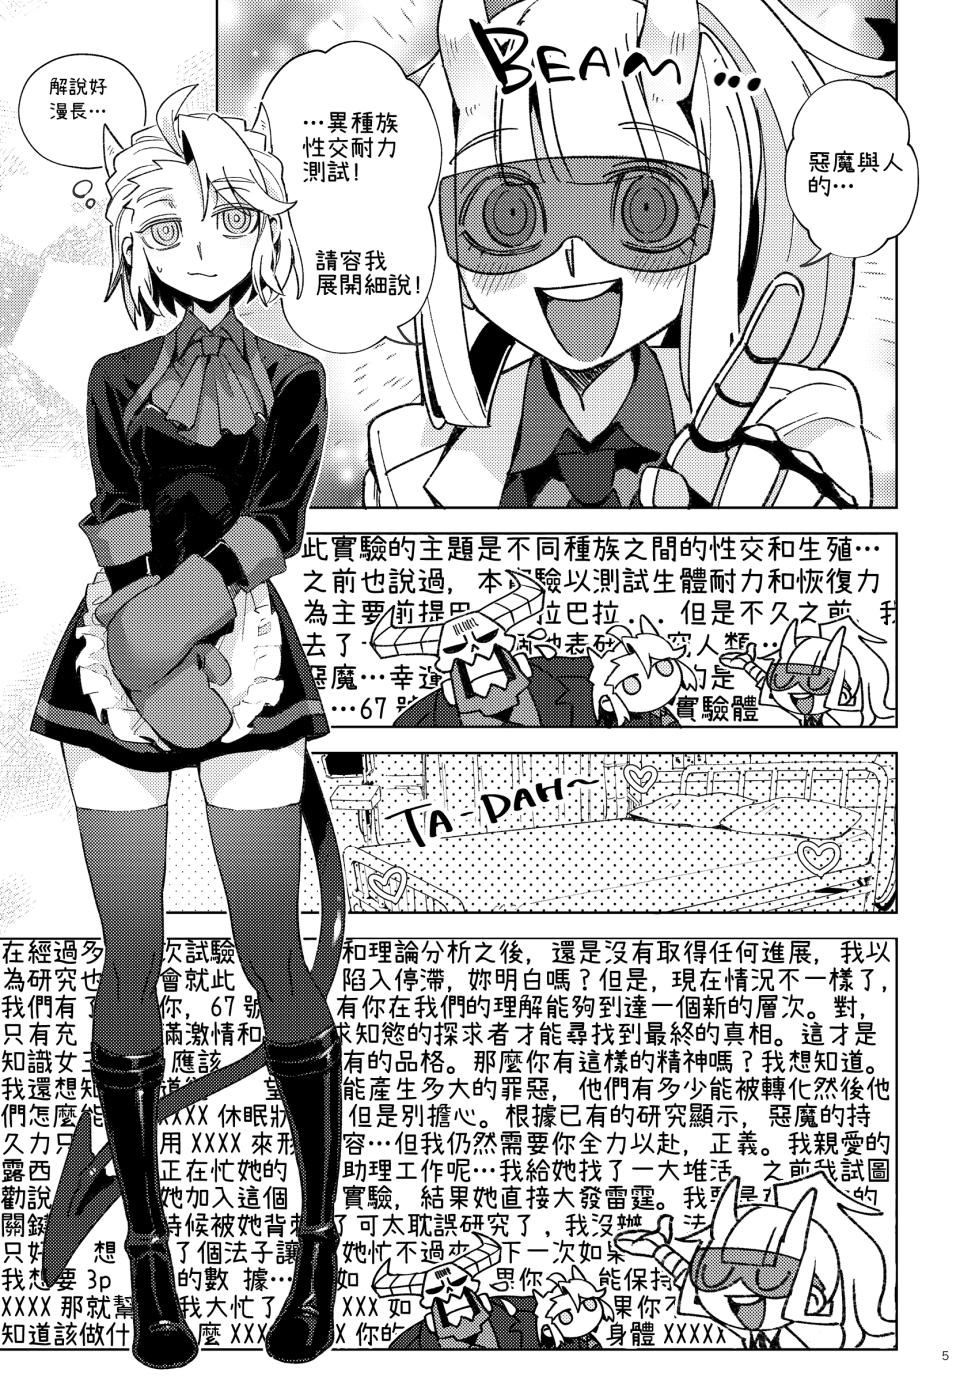 [Tettsui Sole (Noah)] Re: (Helltaker)[Chinese] [沒有漢化] (Ongoing) - Page 5